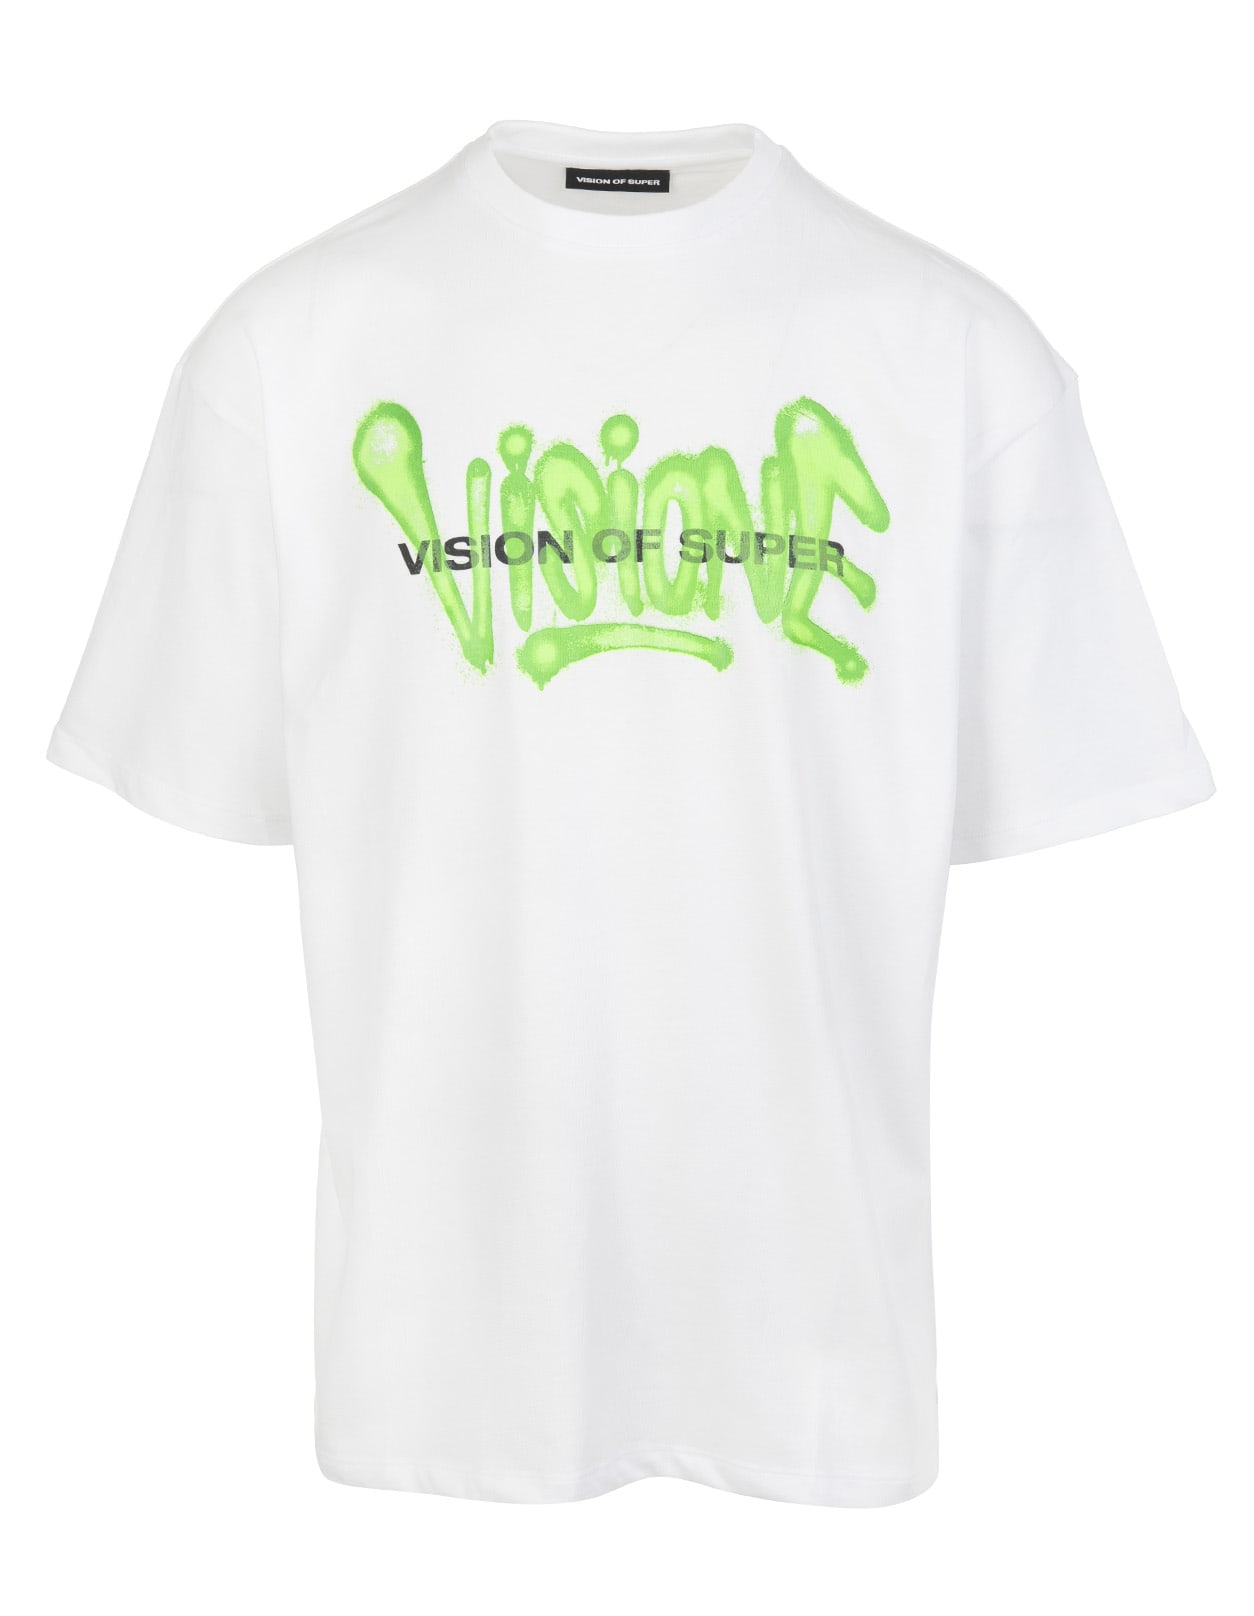 Vision of Super White And Green visione Man T-shirt